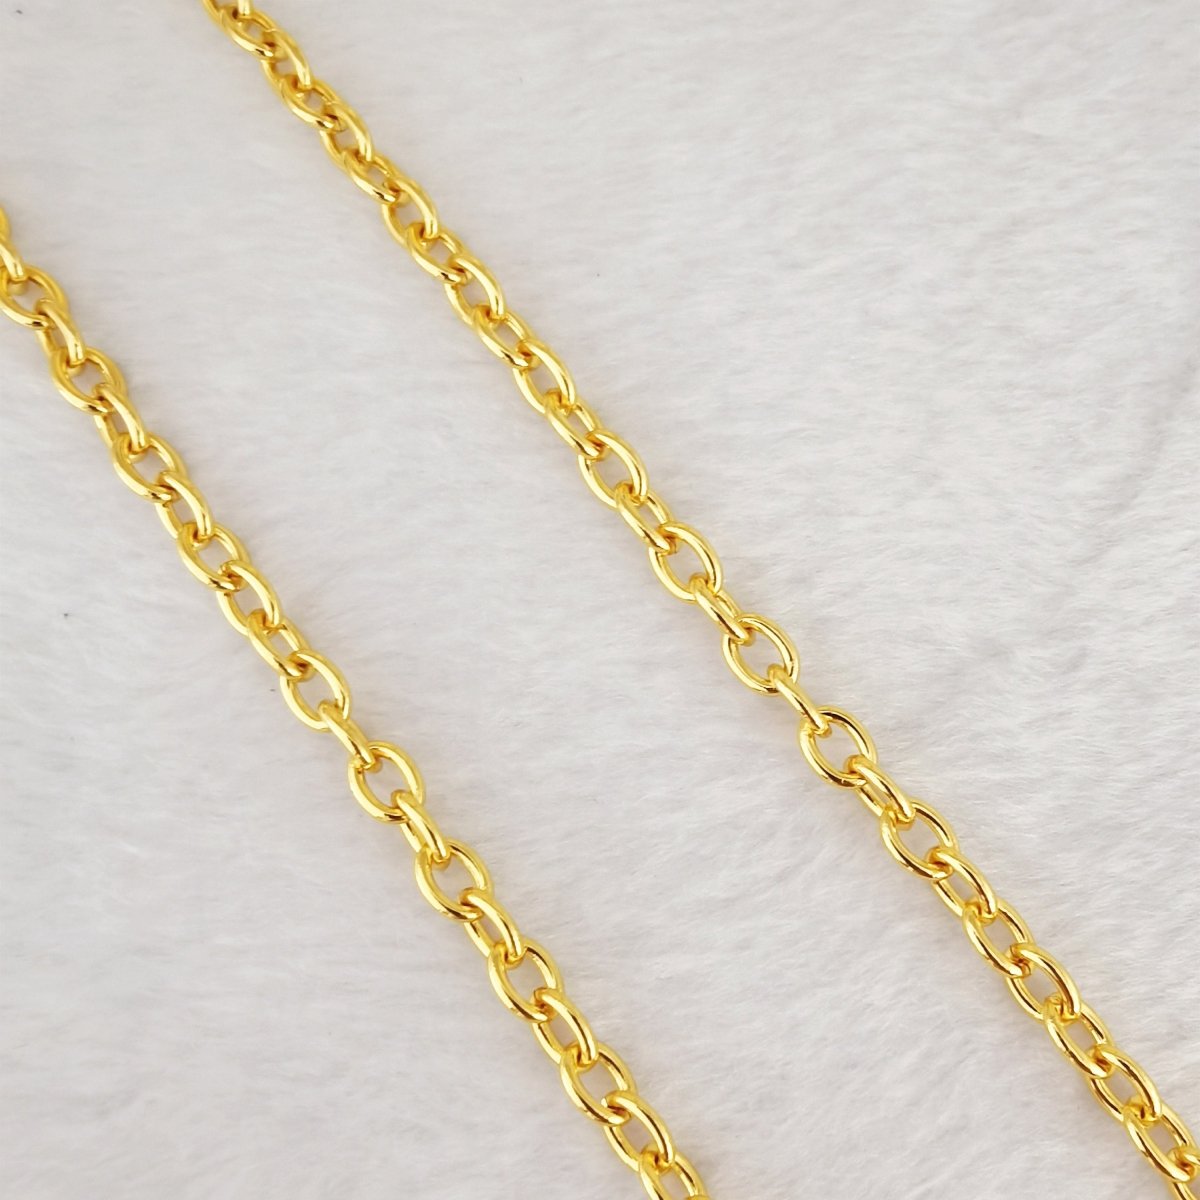 Gold Chunky Rolo CABLE Chains, Link Size 5X6.8mm, 24K Gold Filled Chain by Yard For Necklace Bracelet Anklet Component Supply | ROLL-474 Clearance Pricing - DLUXCA